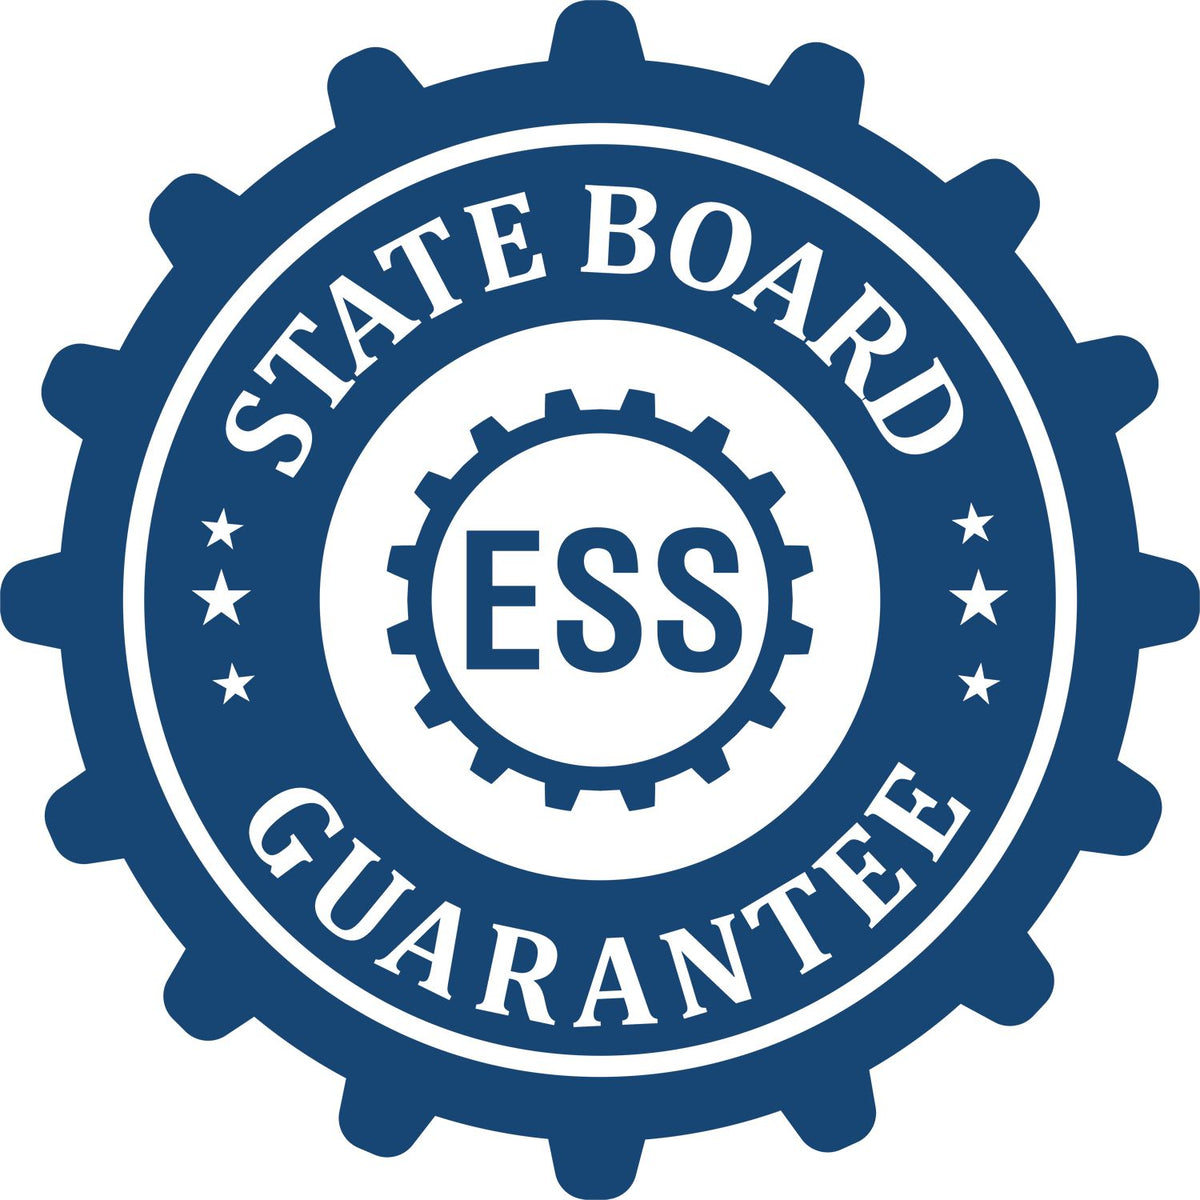 An emblem in a gear shape illustrating a state board guarantee for the Wooden Handle South Dakota Rectangular Notary Public Stamp product.